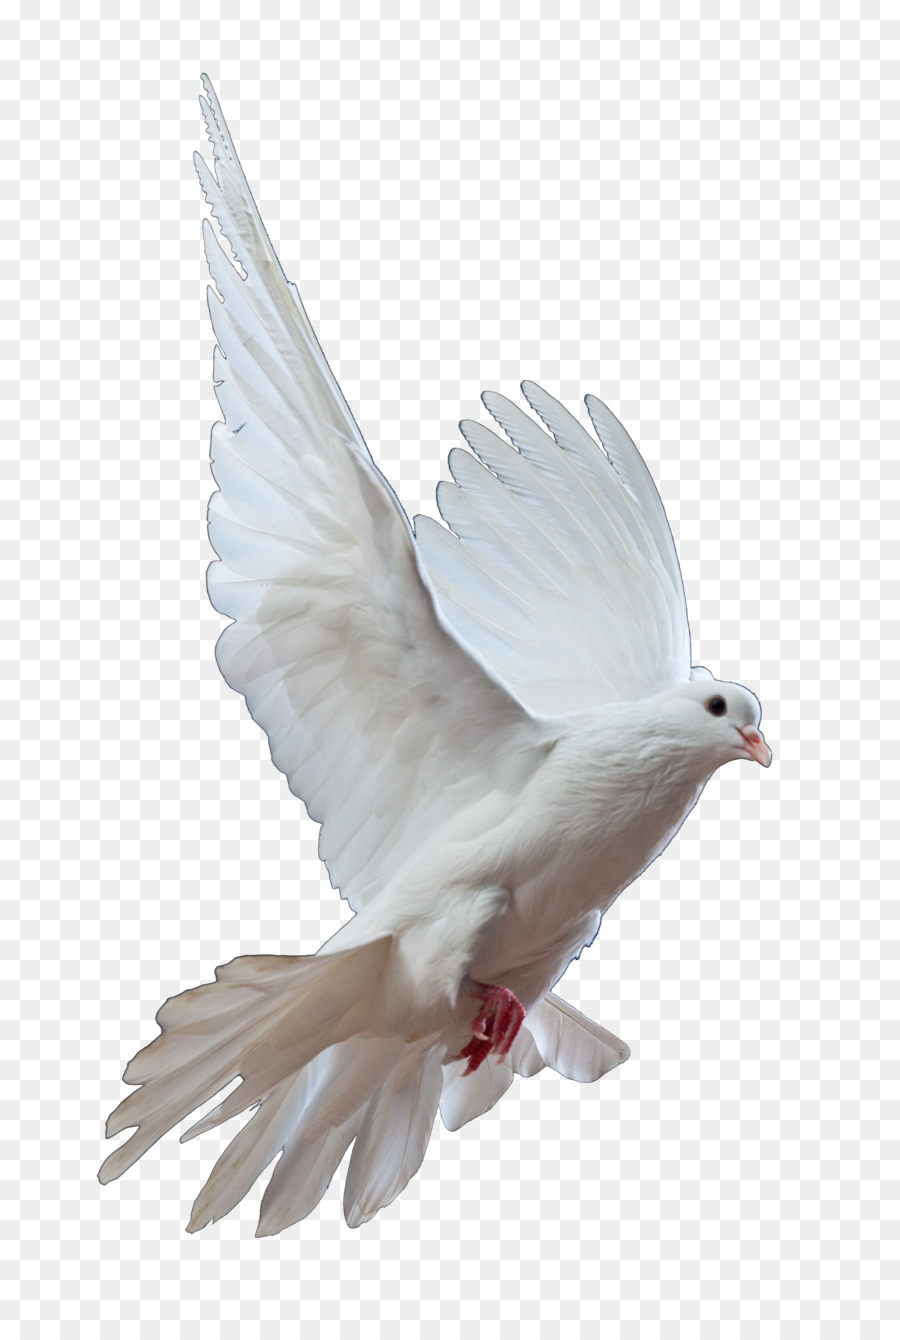 Homing pigeon Columbidae Bird Doves as symbols Release dove - gull png download - 900*1327 - Free Transparent Homing Pigeon png Download.